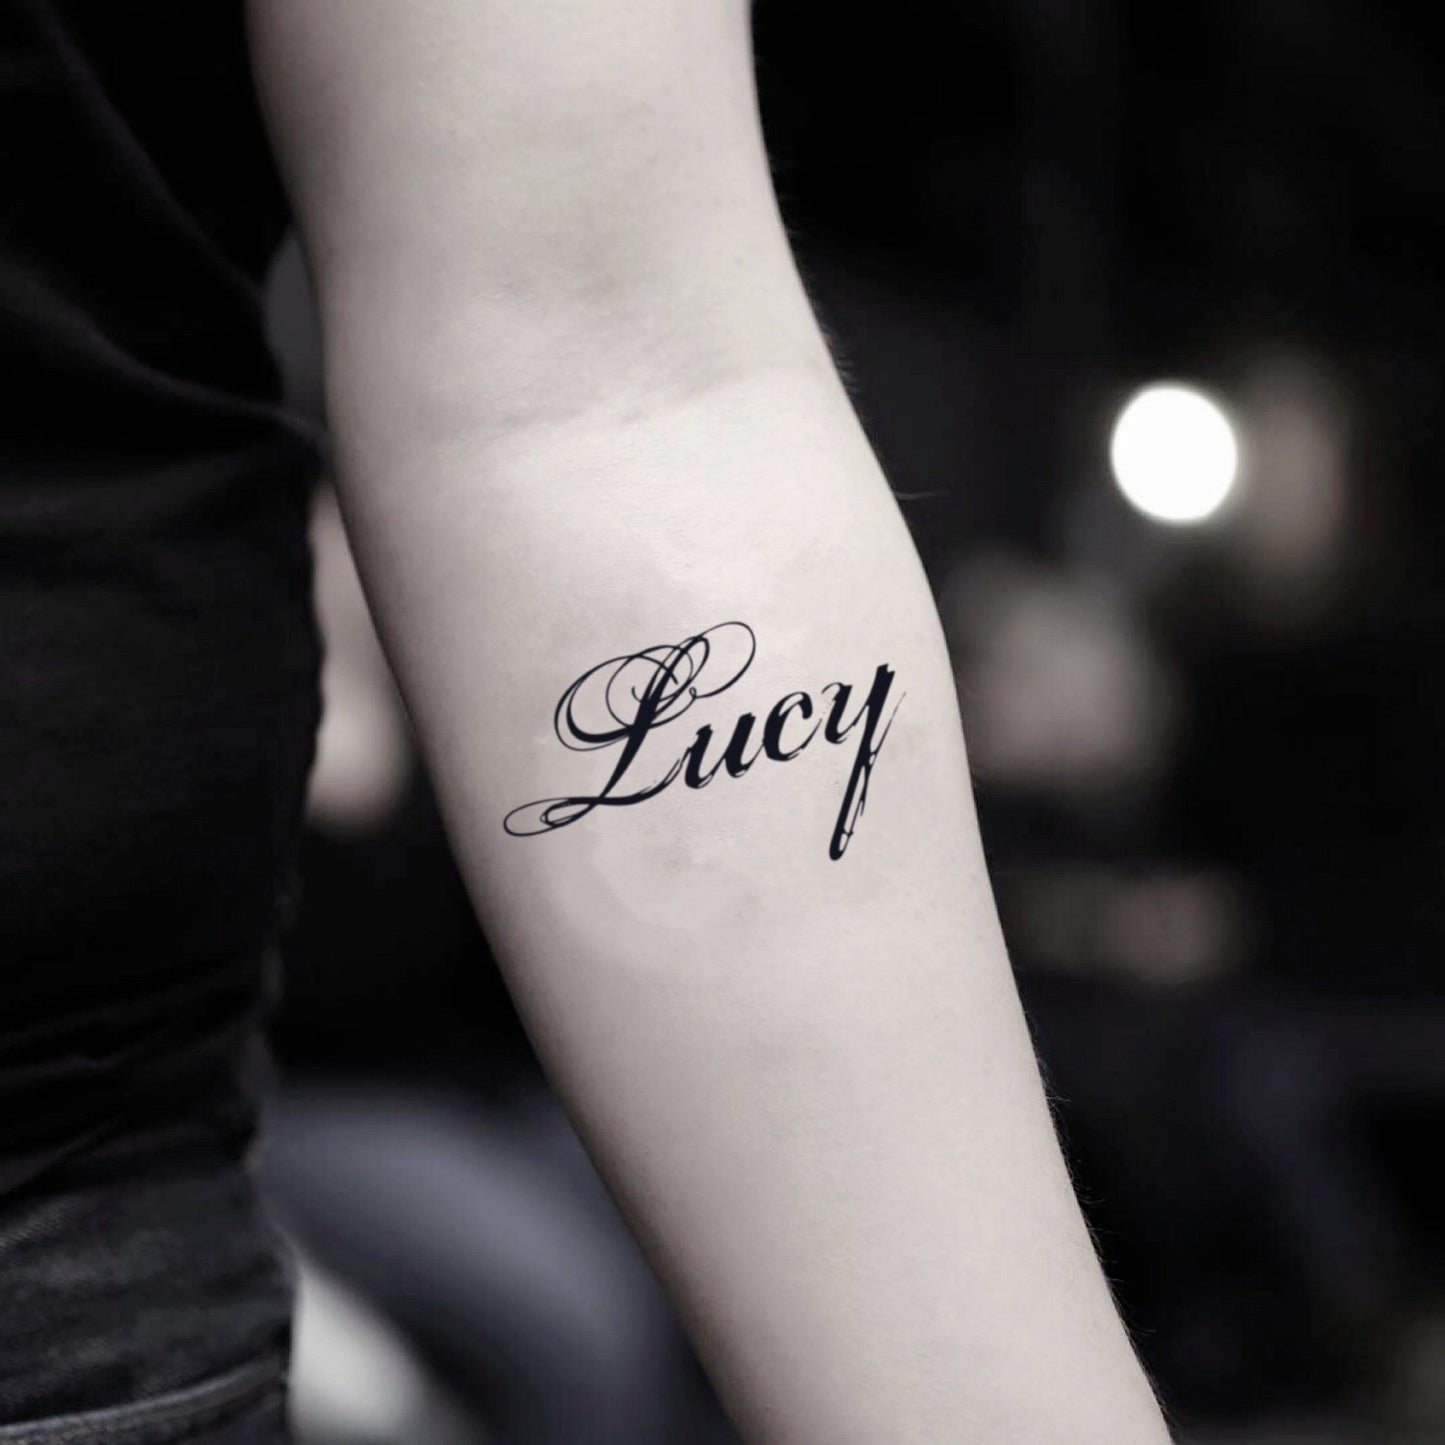 fake small lucy lettering temporary tattoo sticker design idea on inner arm